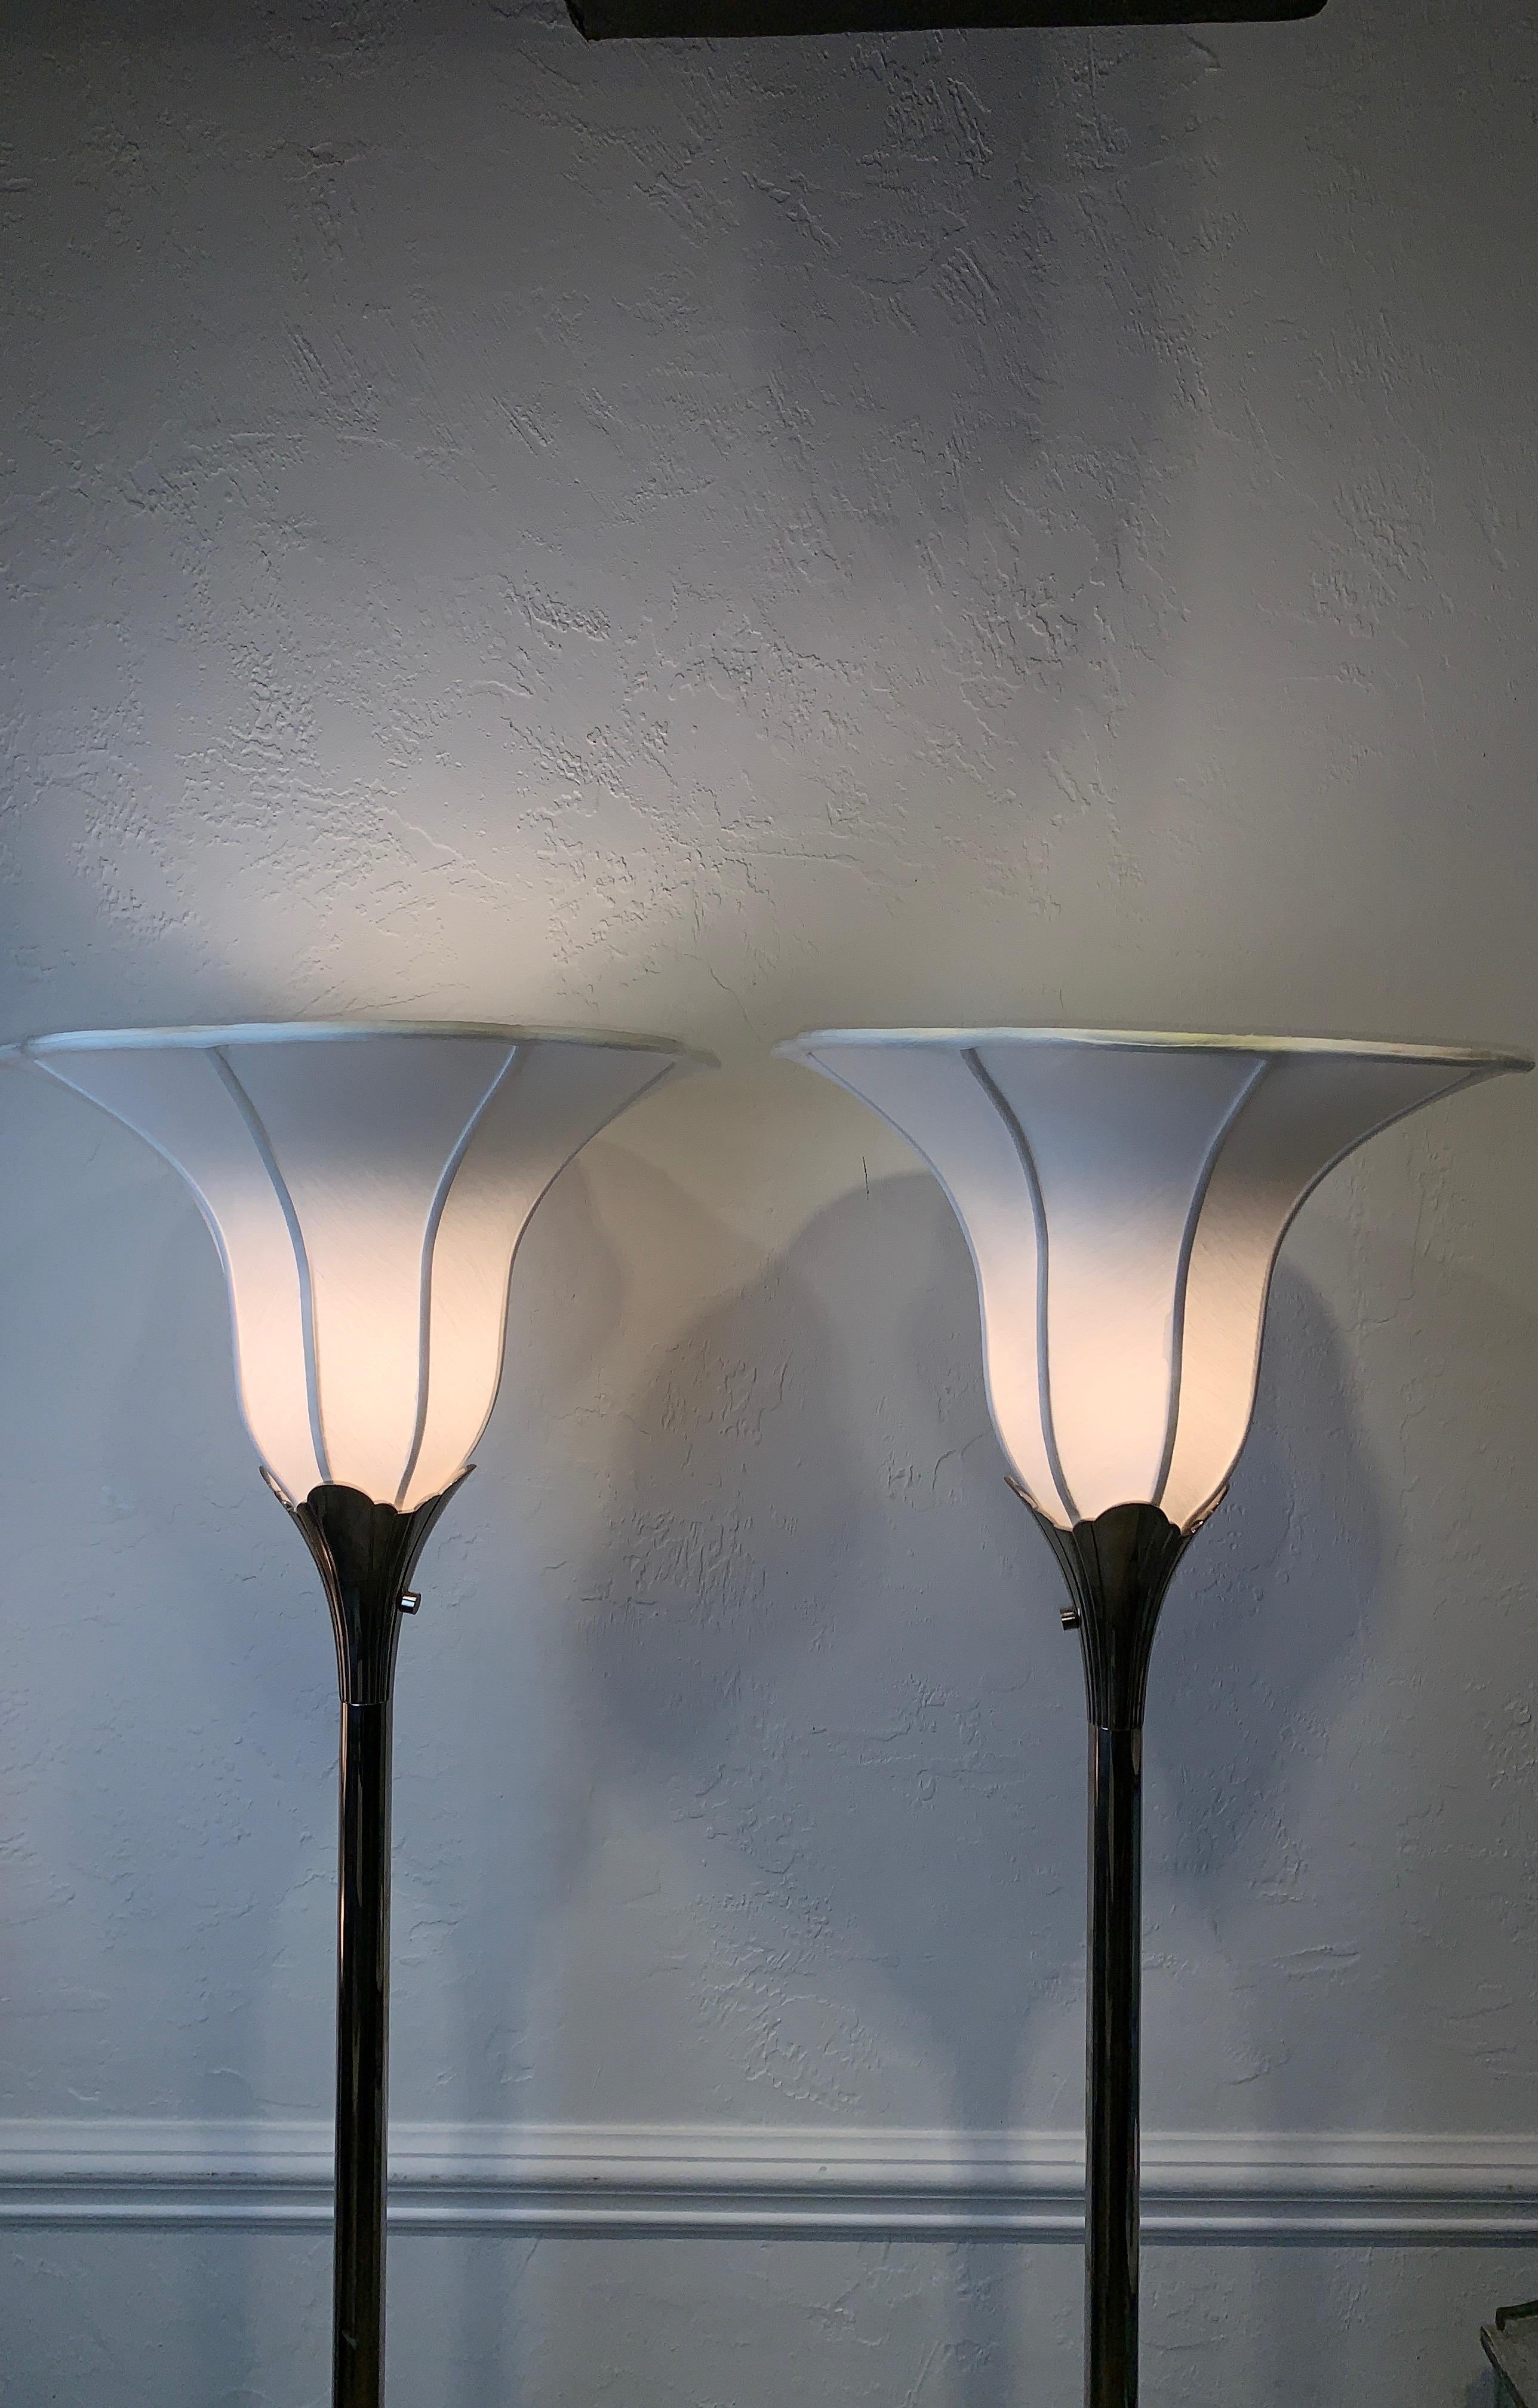 Pair of floor lamps / torchieres by Stiffel. Nickel plated over brass. In the manner of Tommi Parzinger who designed for Stiffel in the mid-20th century.